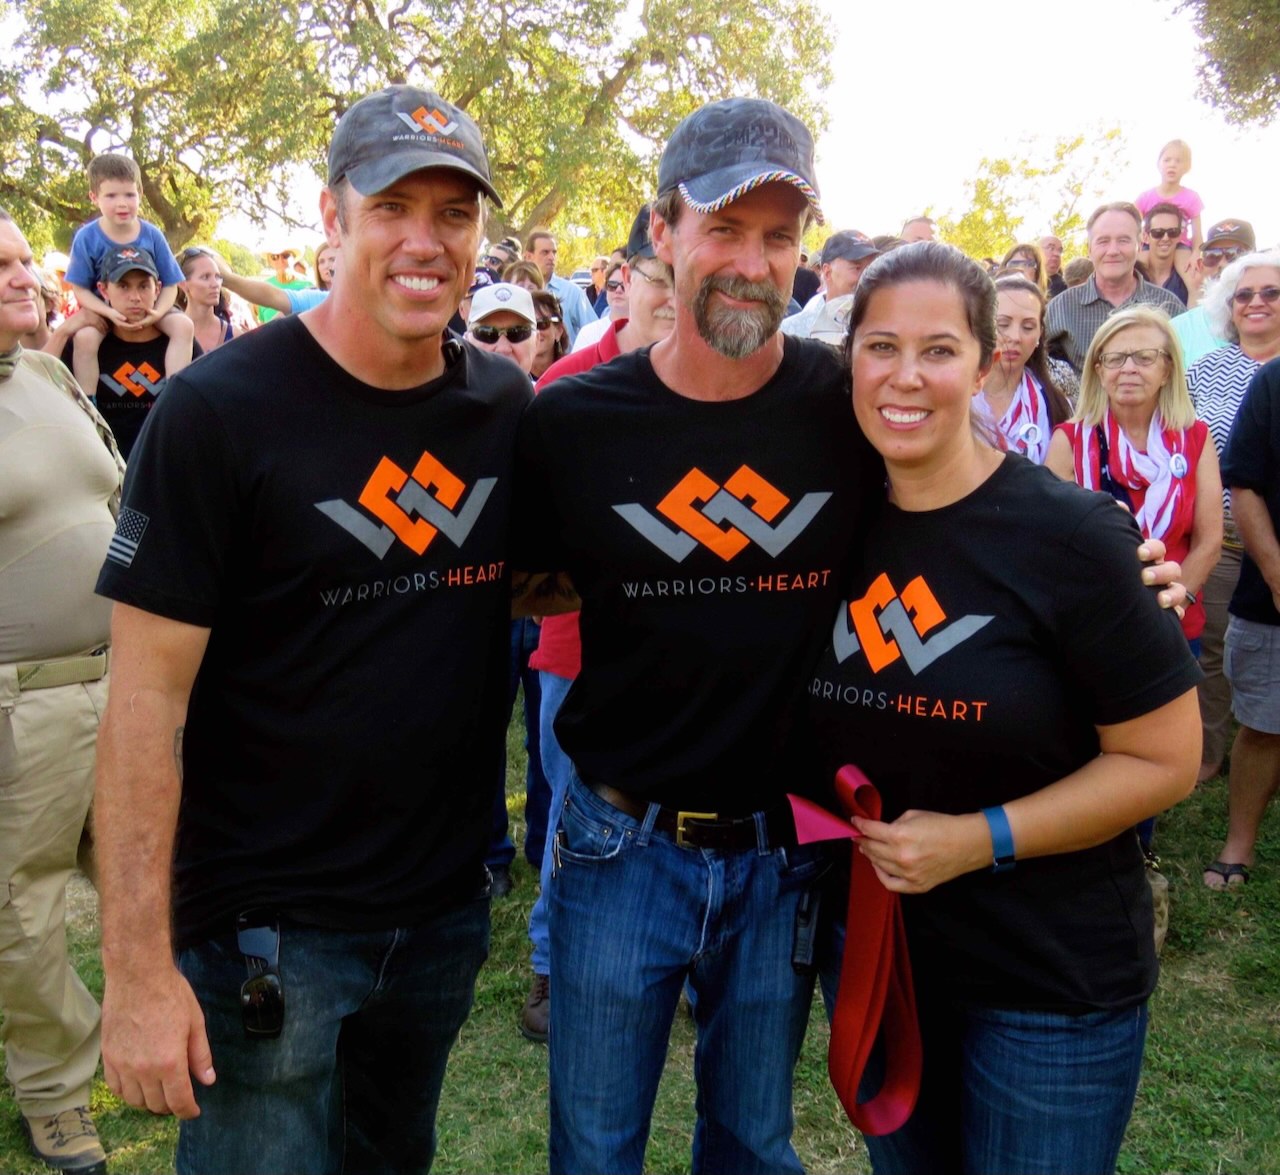 3 Warriors Heart Founders at original ribbon cutting: L to R: Josh Lannon (CEO/President), Tom Spooner (Former Special Forces) and Lisa Lannon (Former Law Enforcement Officer) on their 543-acre ranch